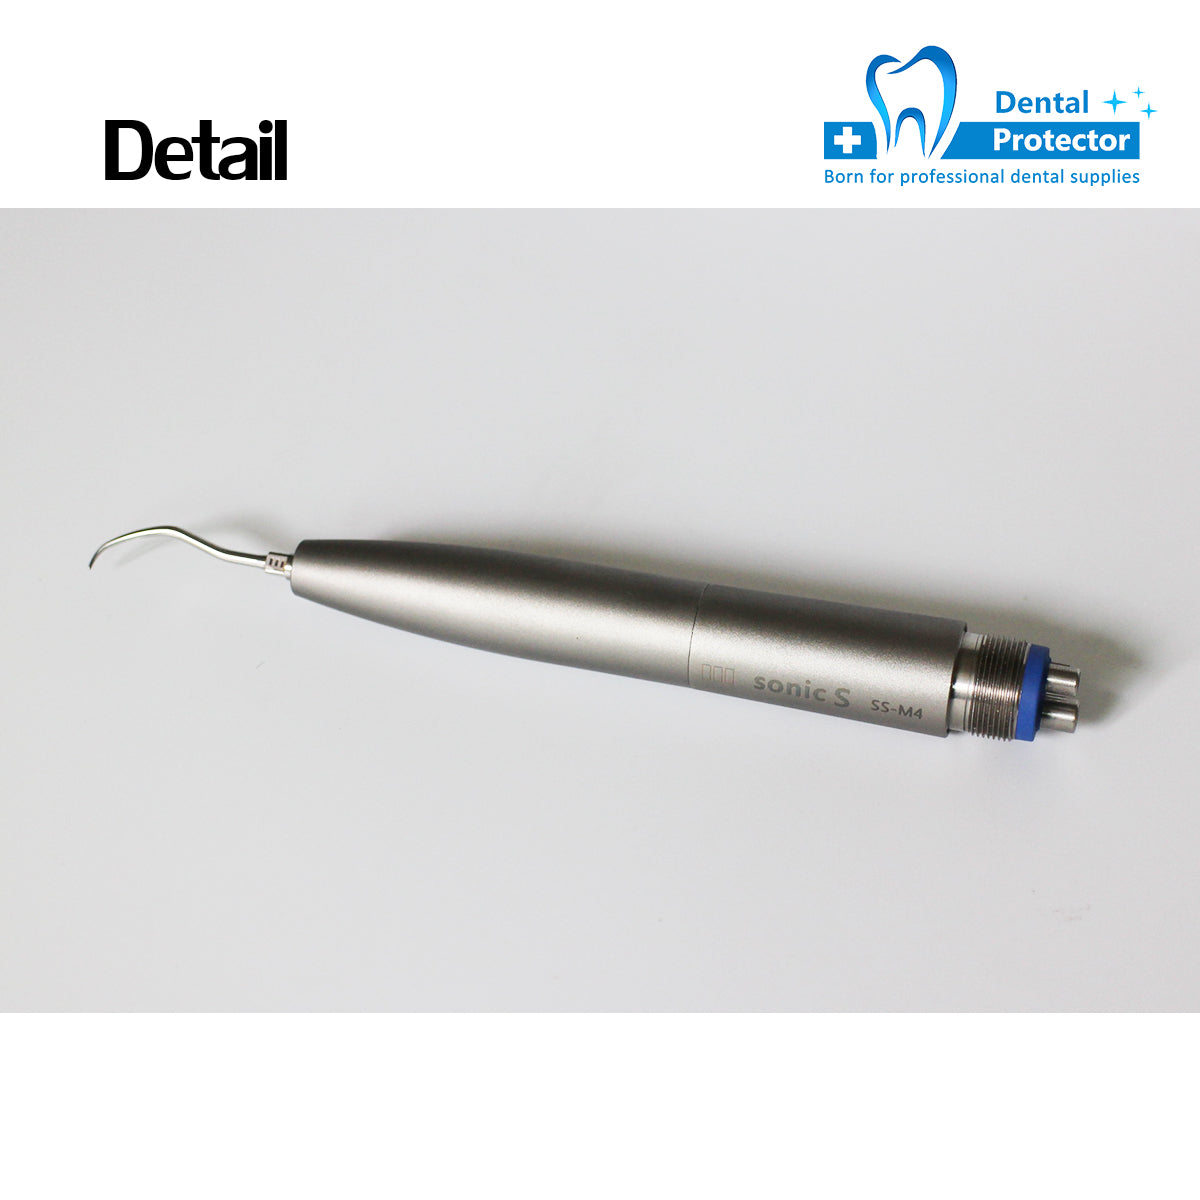 THREEH 3H SONIC-S Air Scaler air driven Irrigating root canals